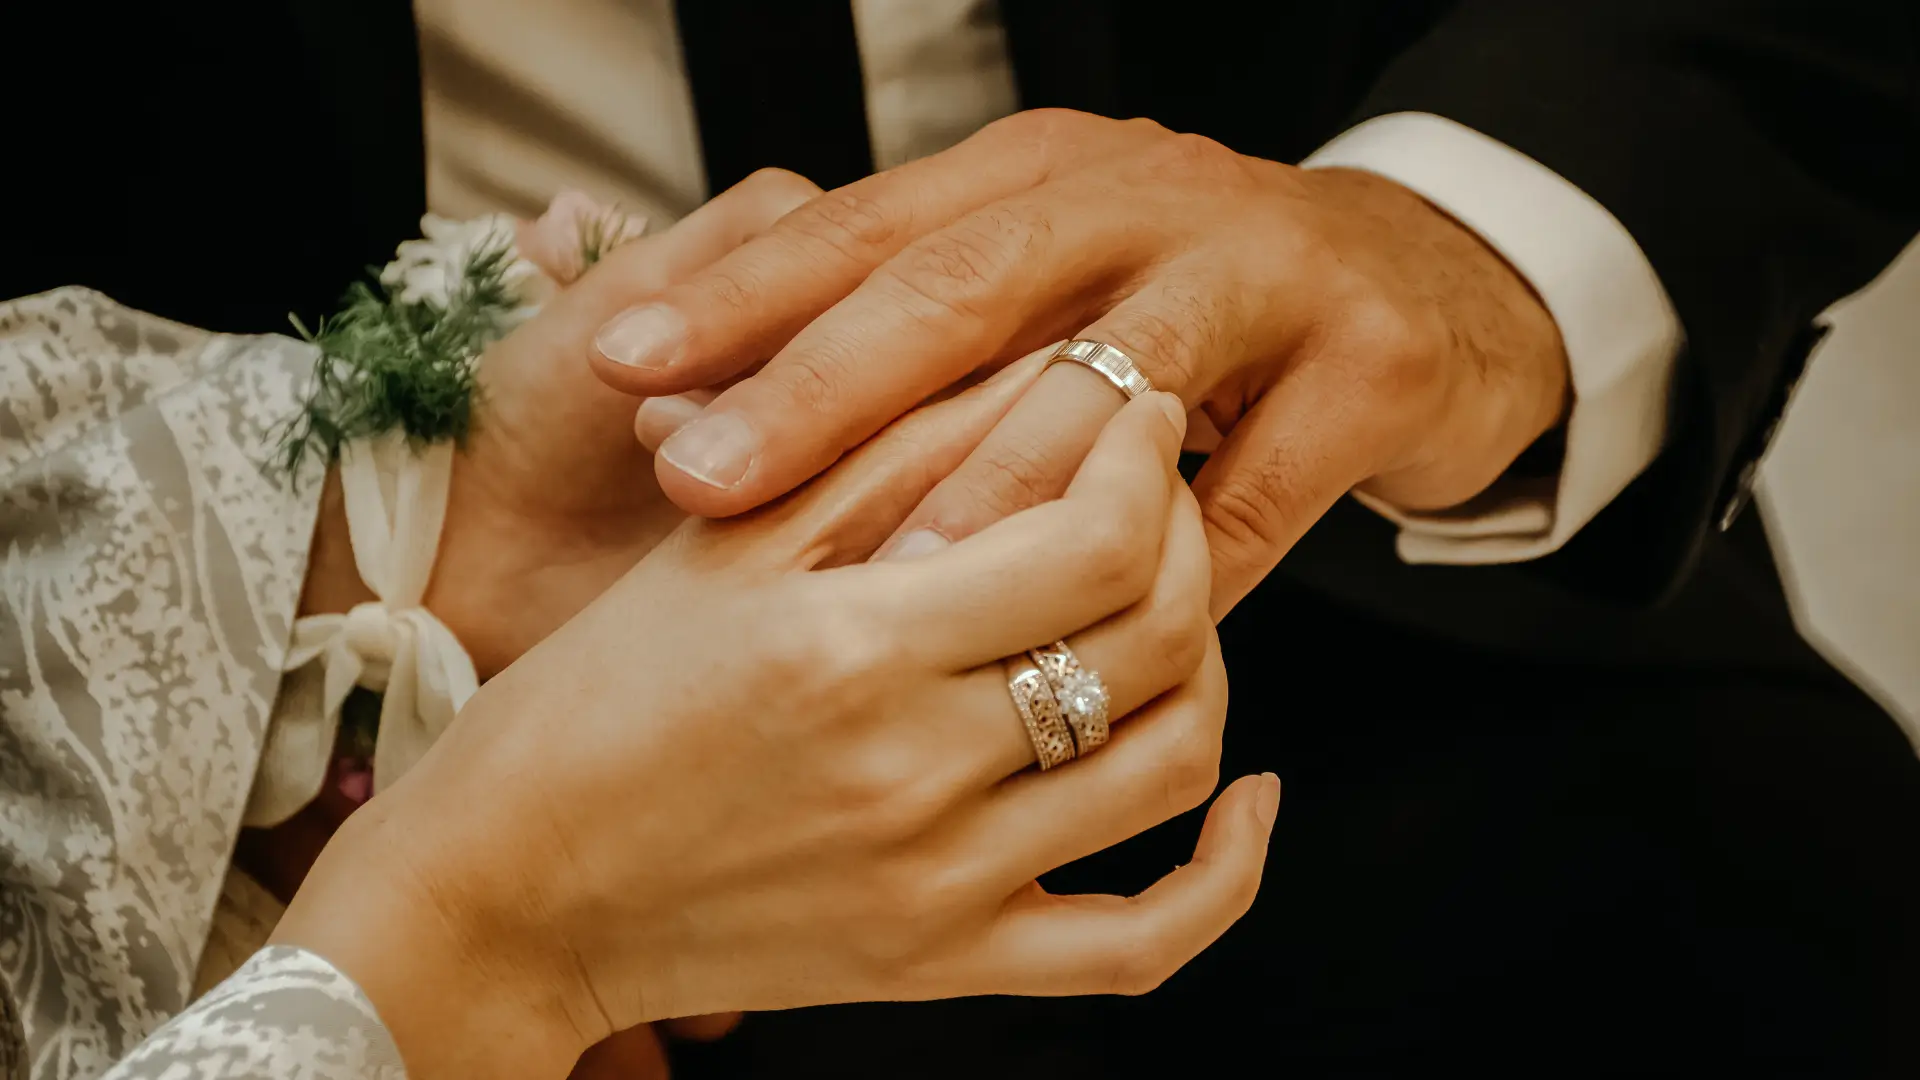 Getting ready to tie the knot? Our estate planning lawyers can help set your family up for long-term success